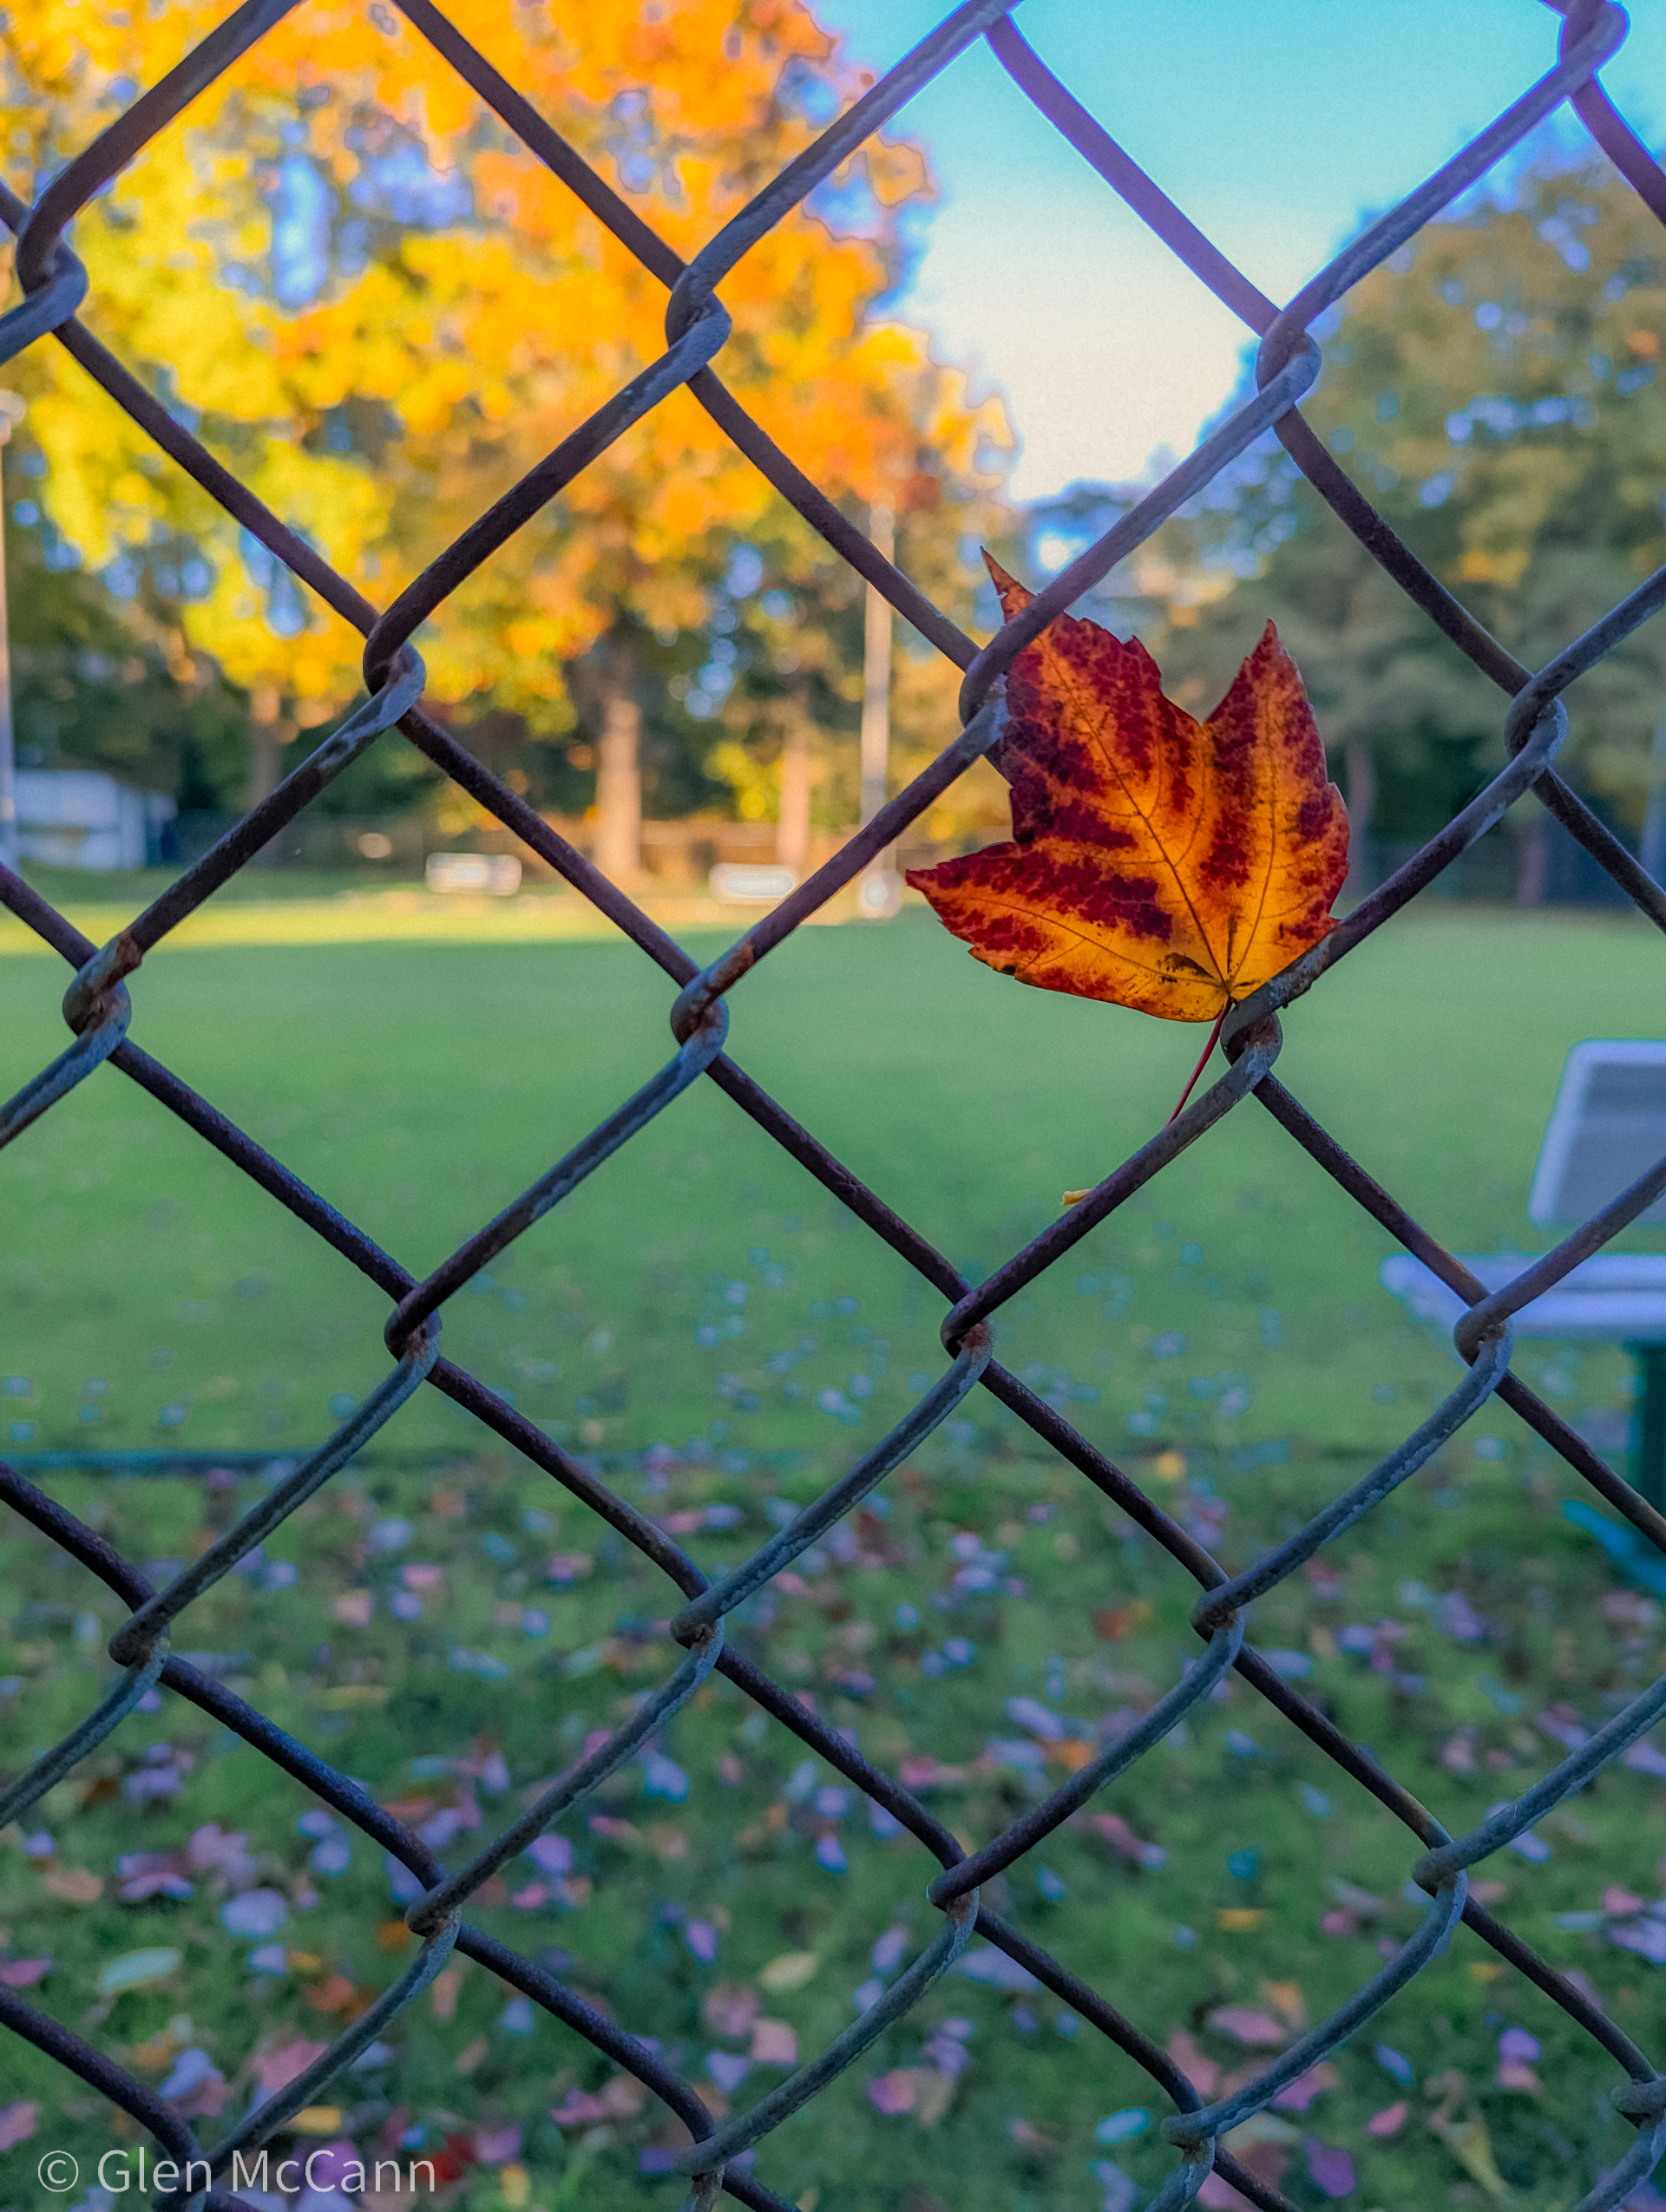 Photo of a bright red maple leaf caught in a chain link fence.